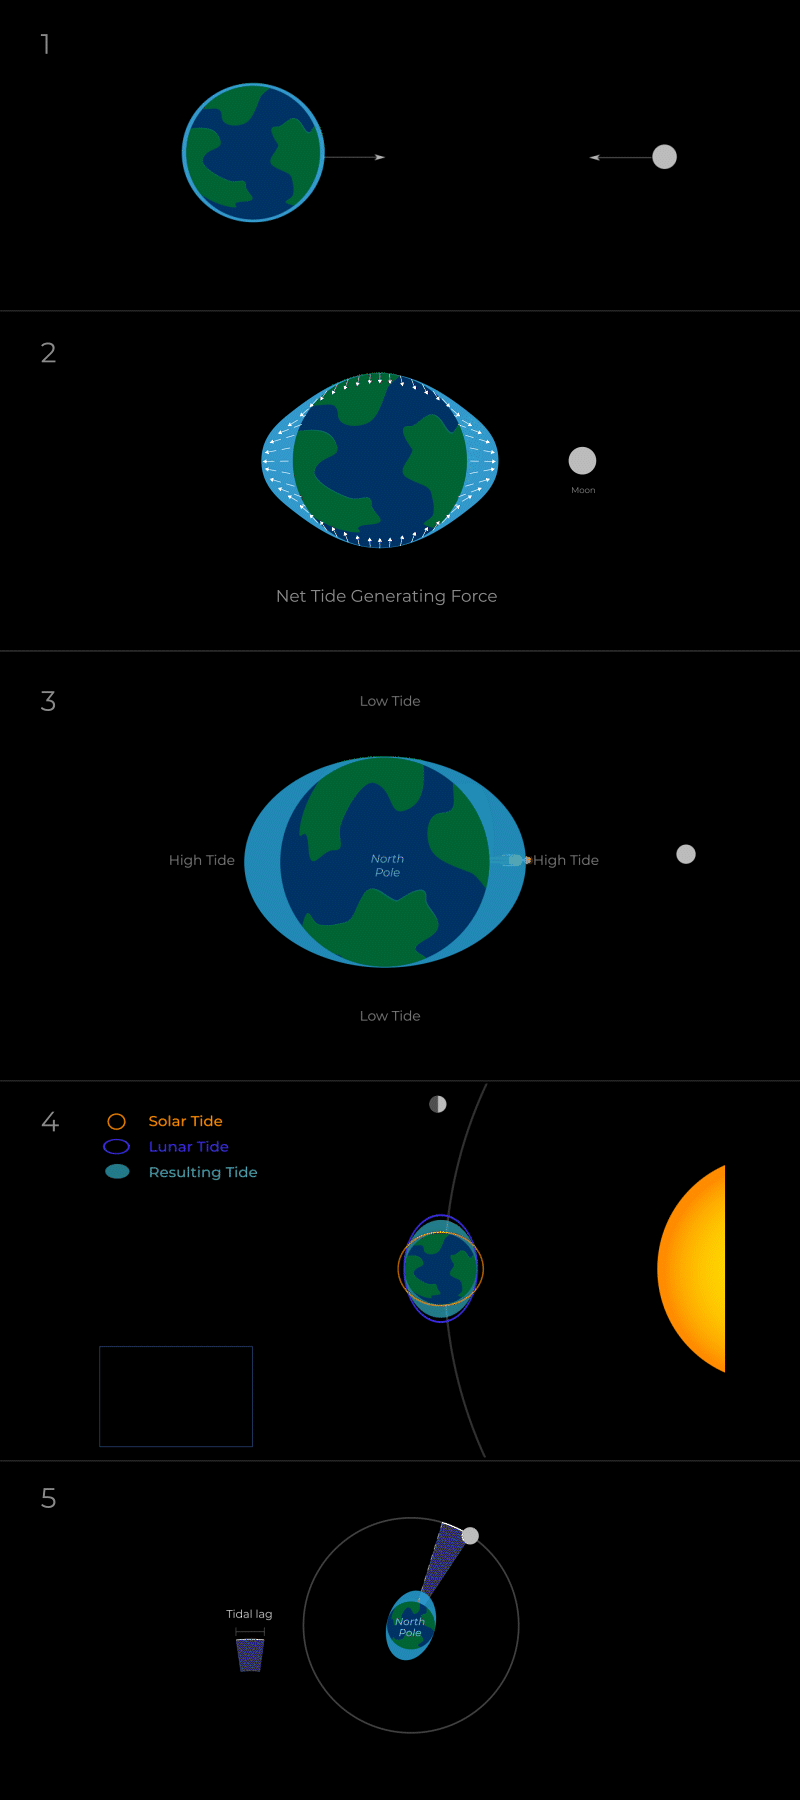 Animations of the Earth and Moon, with exaggerated representations of Earth's oceans stretching into an oblong blob (forming tides) in response to the Moon's gravitational pull. One animation also includes the Sun and its gravitational pull.